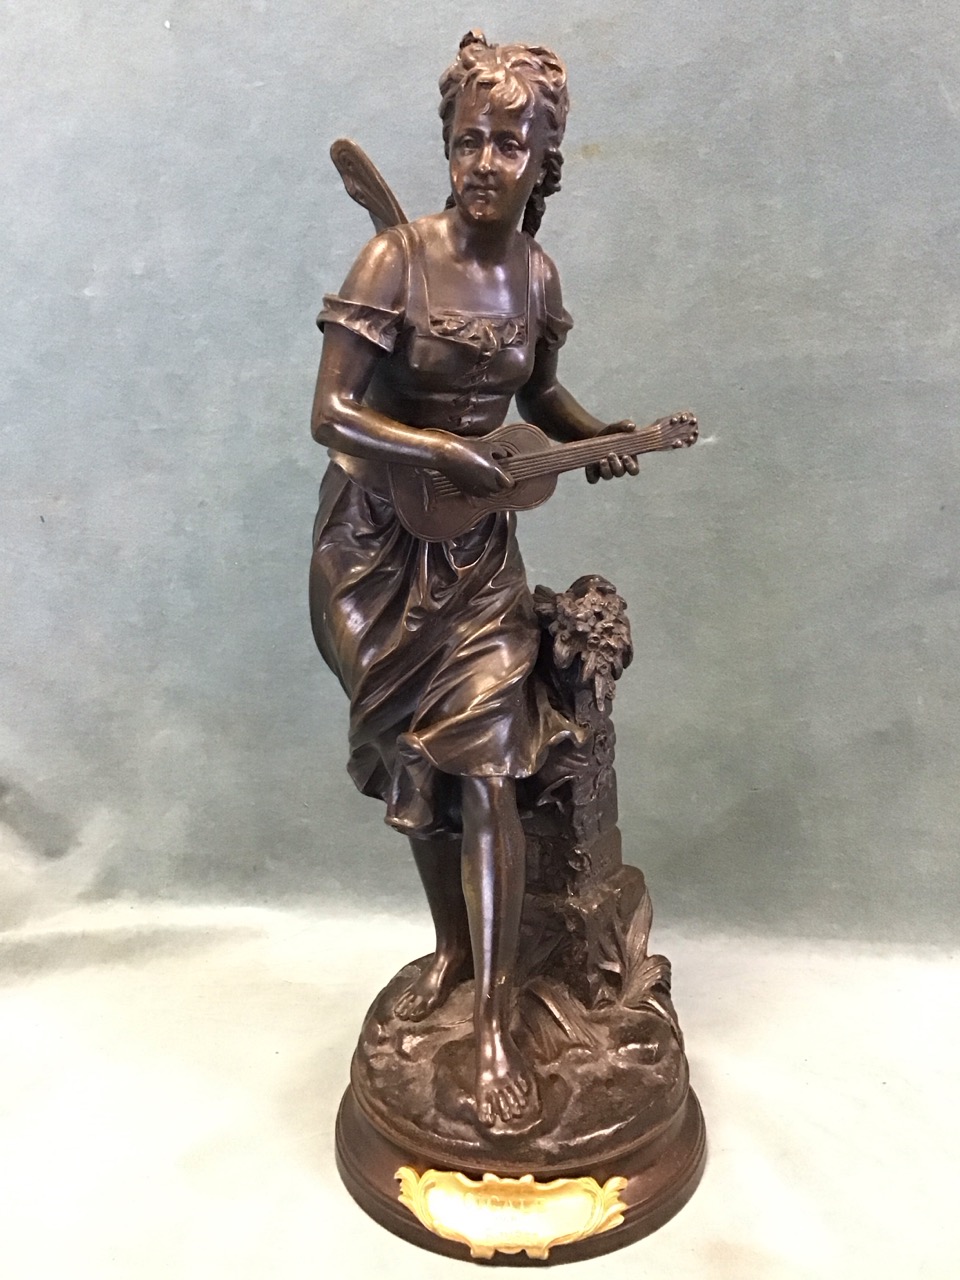 Eutrope Bouret, a C19th French patinated bronze figure of a winged fairy beside a plinth